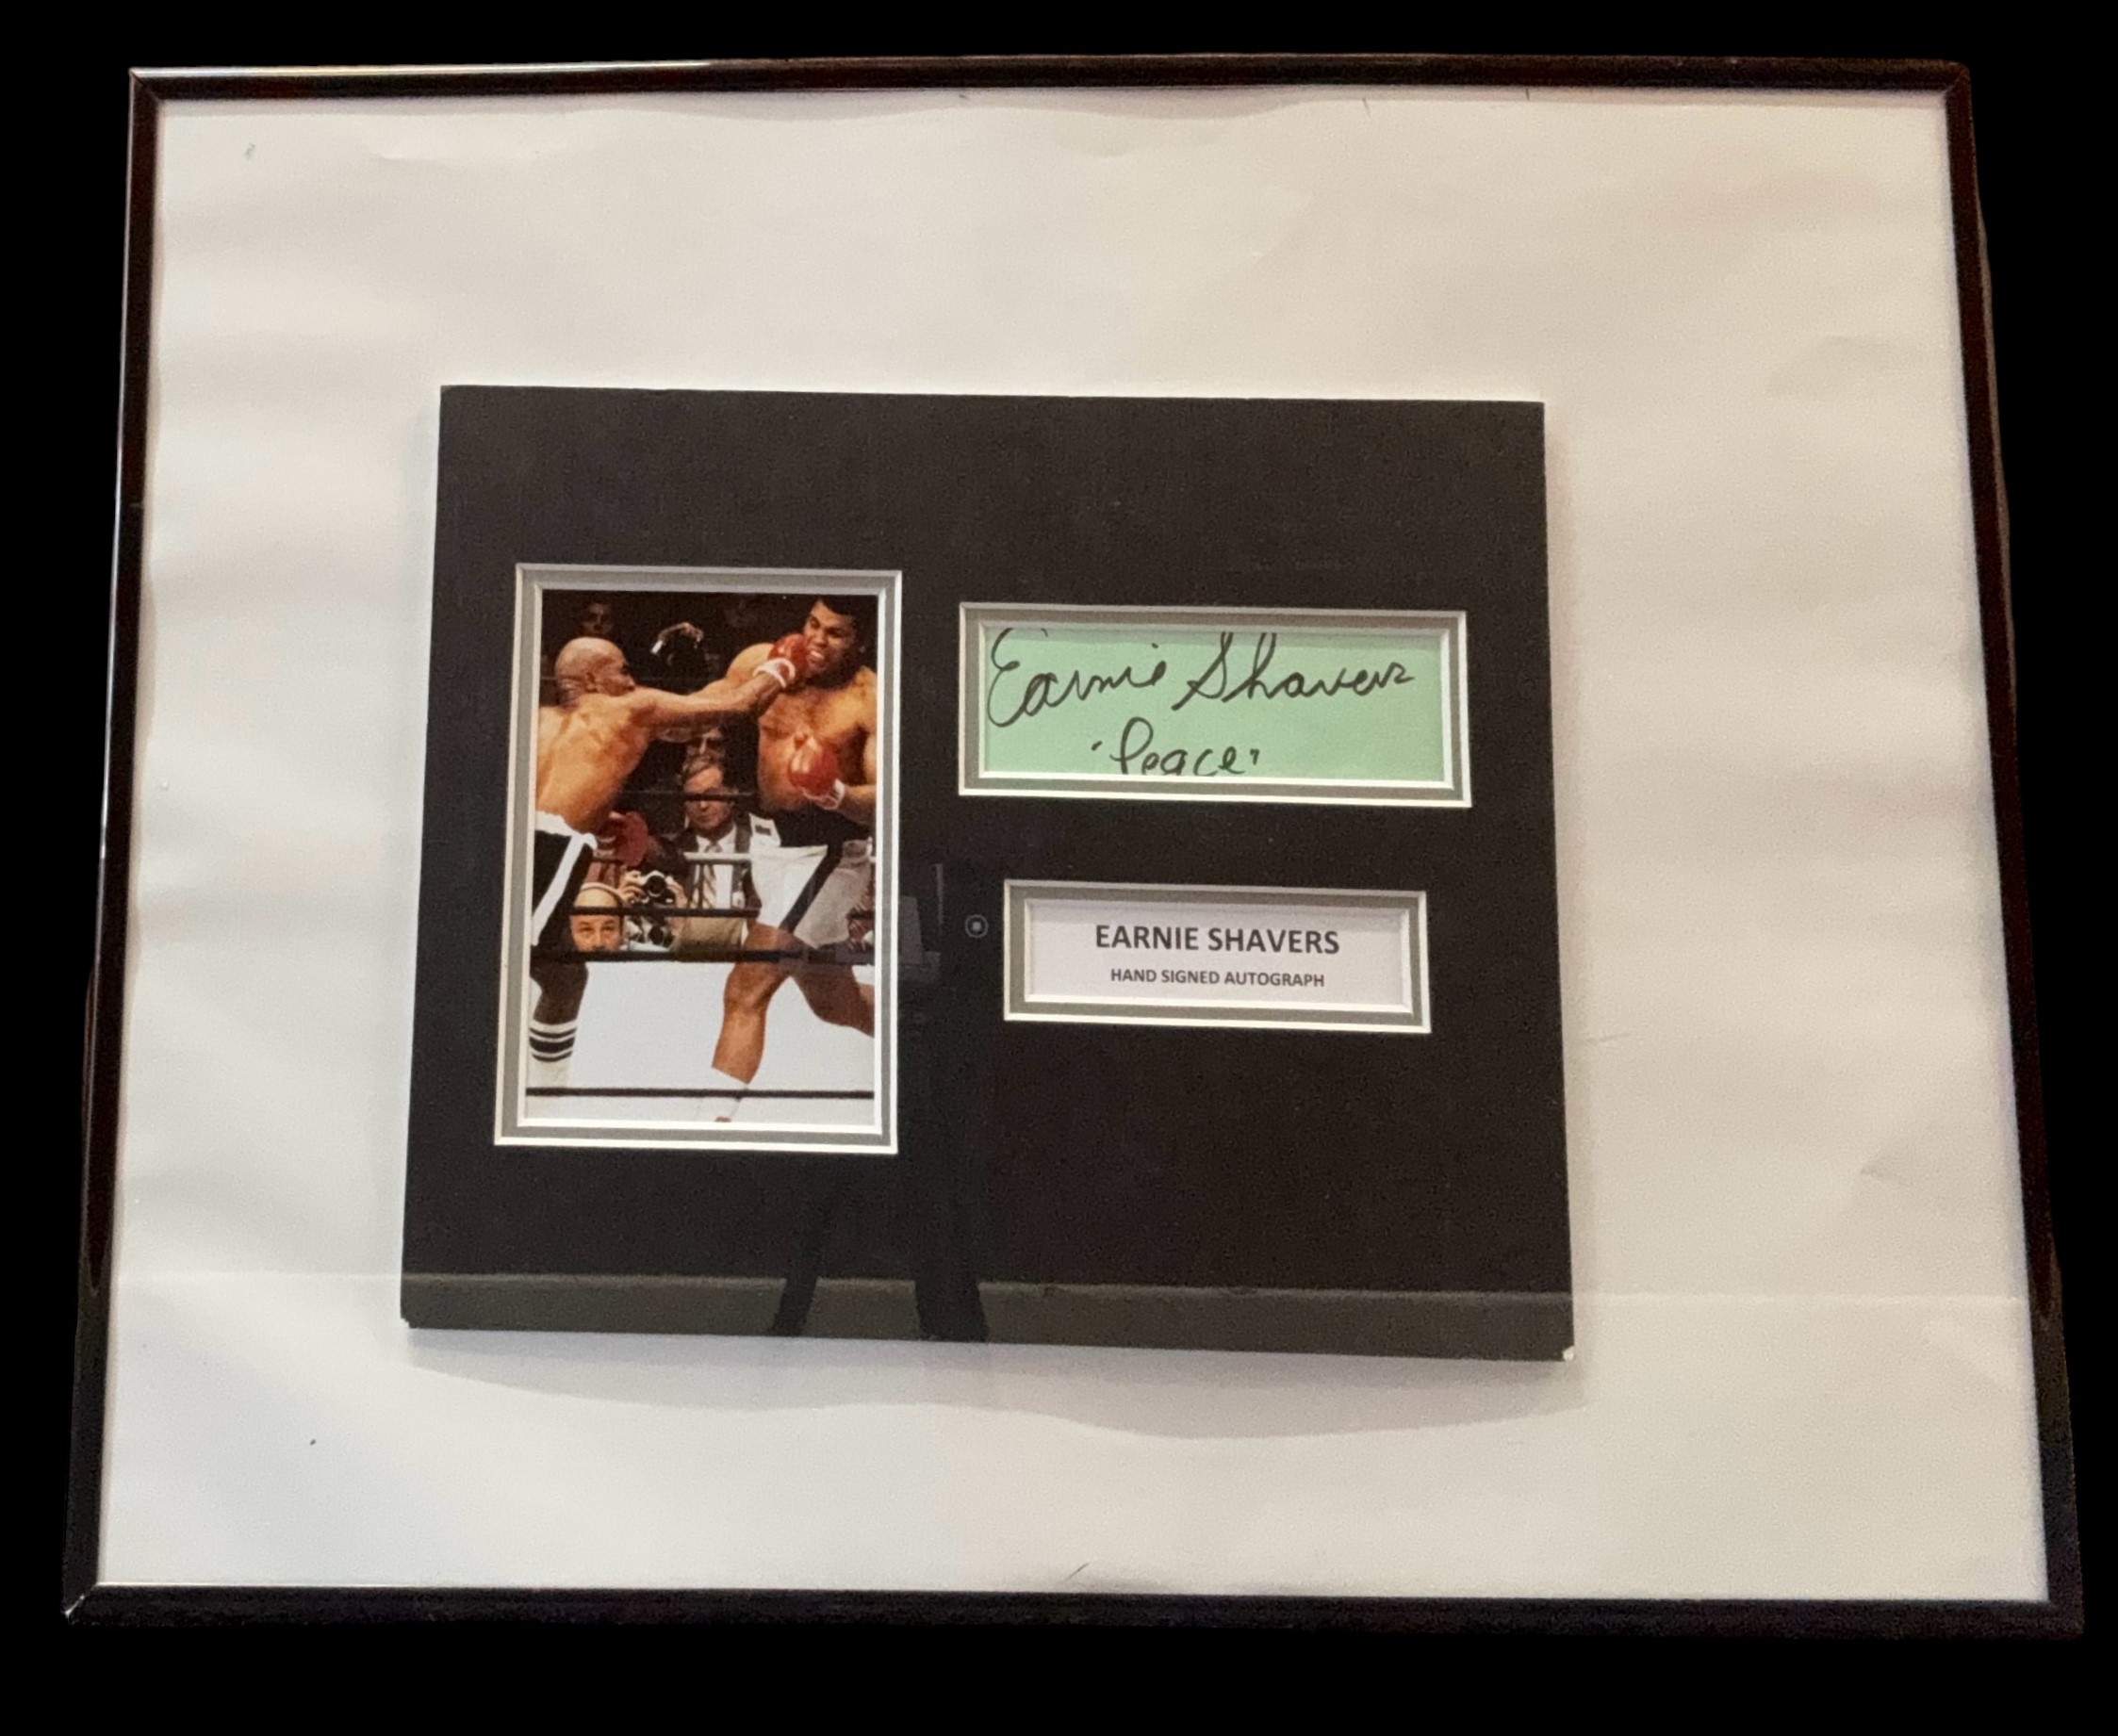 Earnie Shavers 21x16 inch framed and mounted signature display includes signed album page and colour